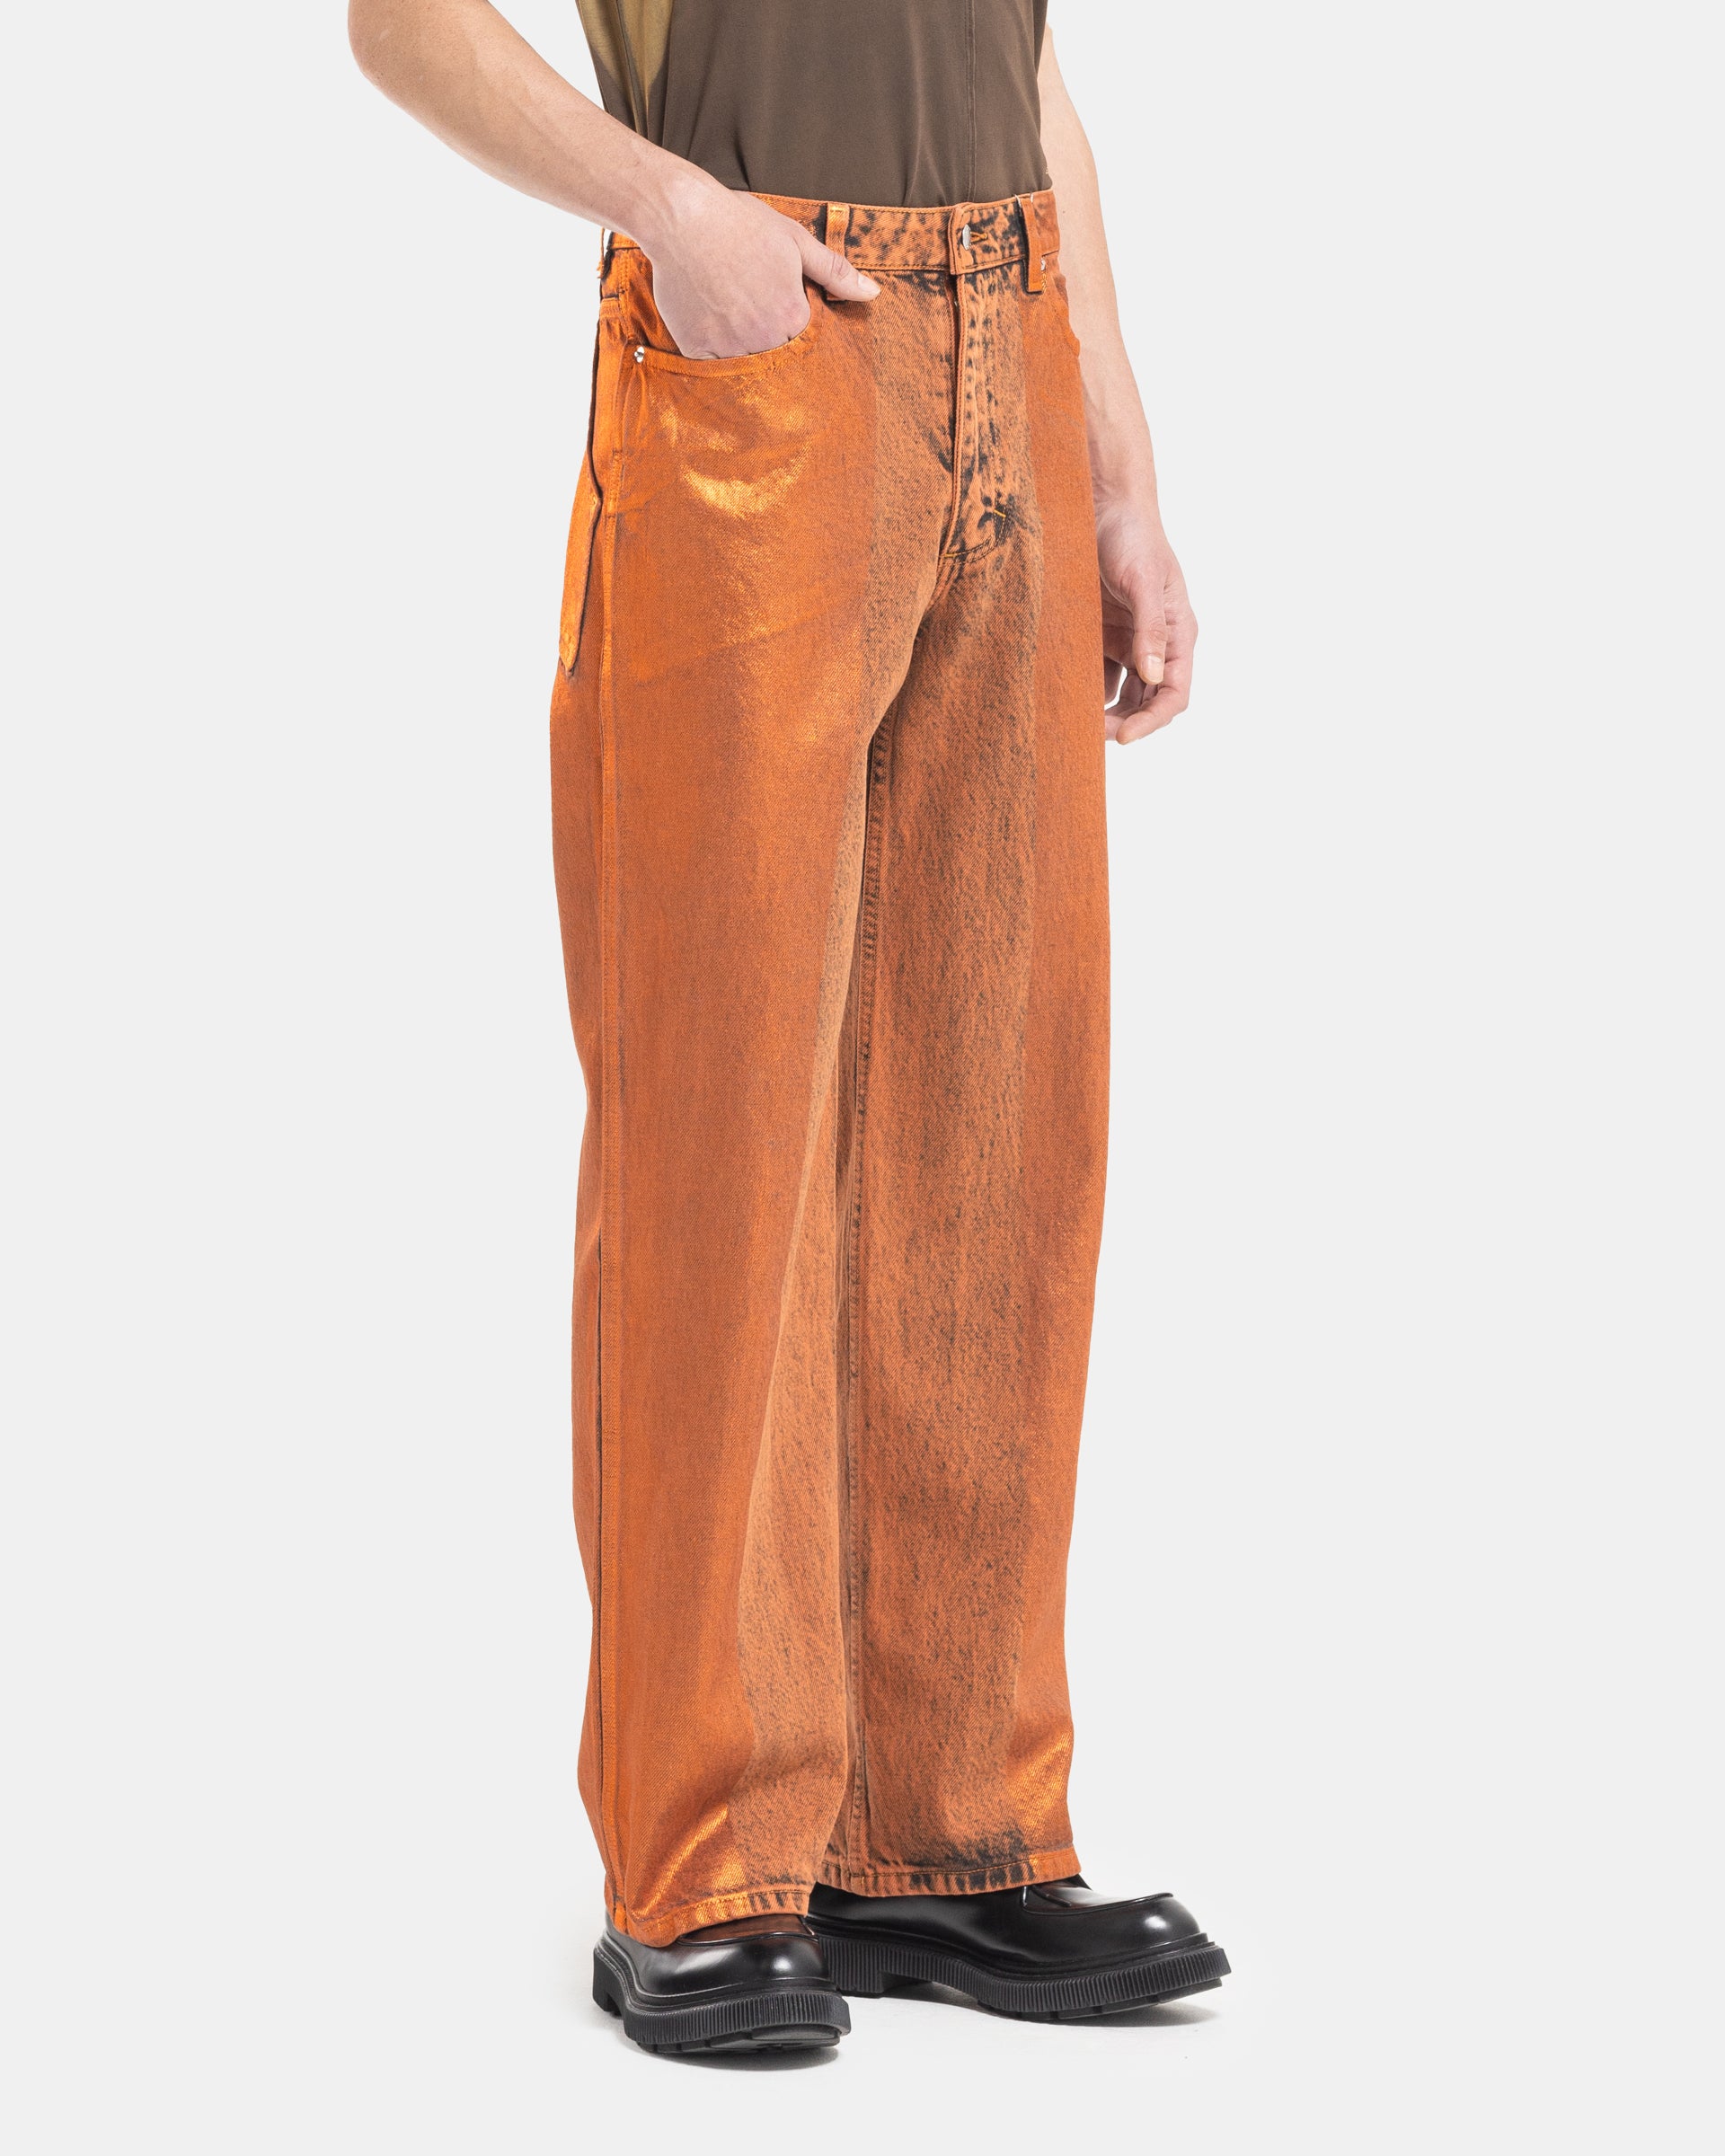 Male model wearing Eckhaus Latta Wide Leg Jeans with a shiny coating